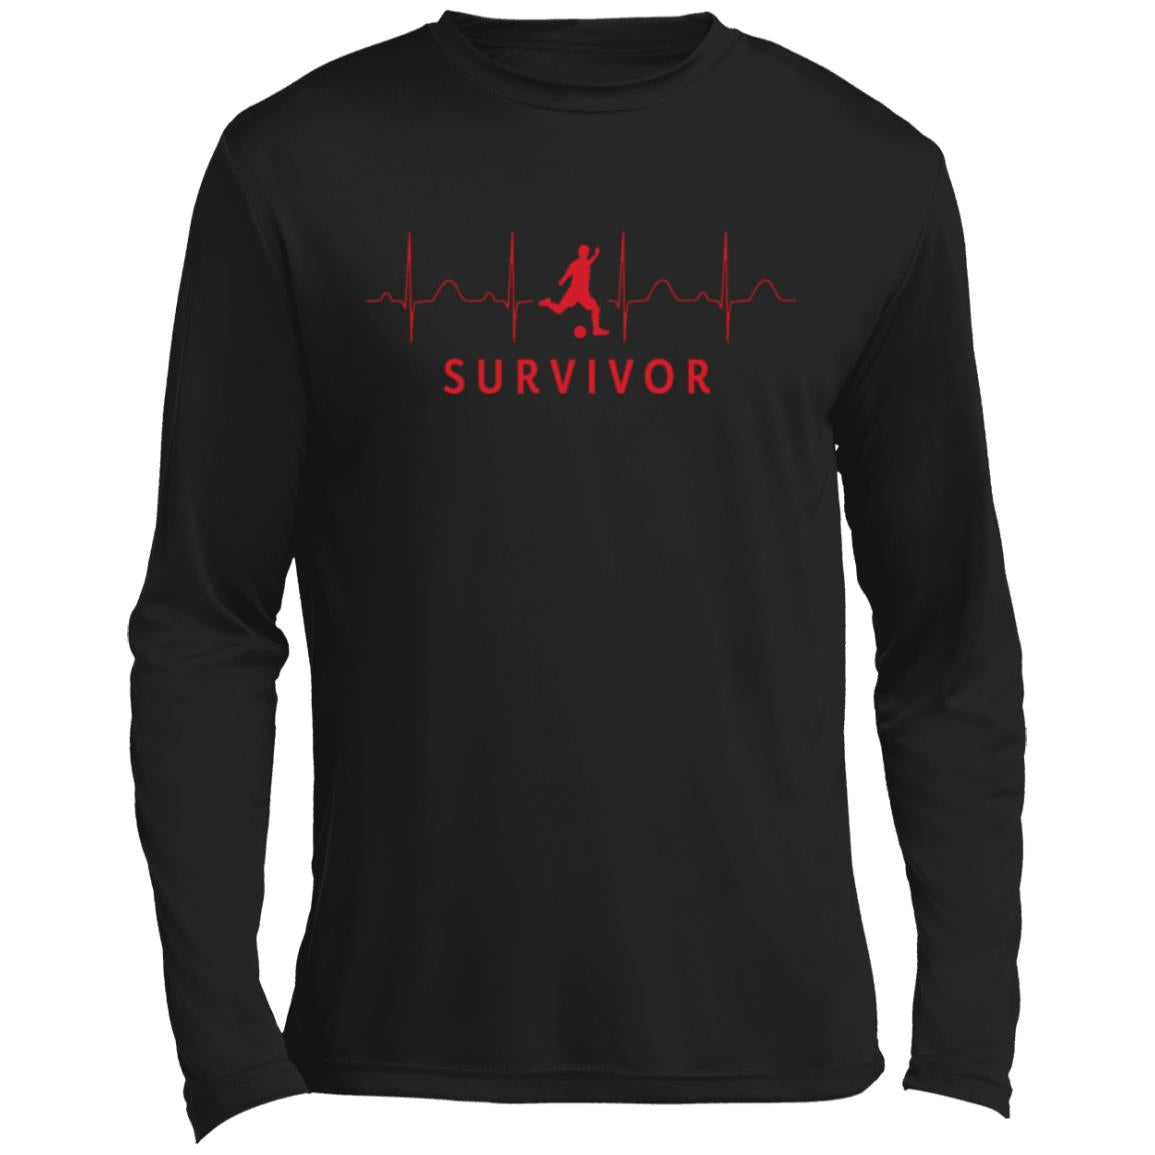 Black long-sleeve tee with "SURVIVOR" text along with a soccer player icon with EKG lines behind